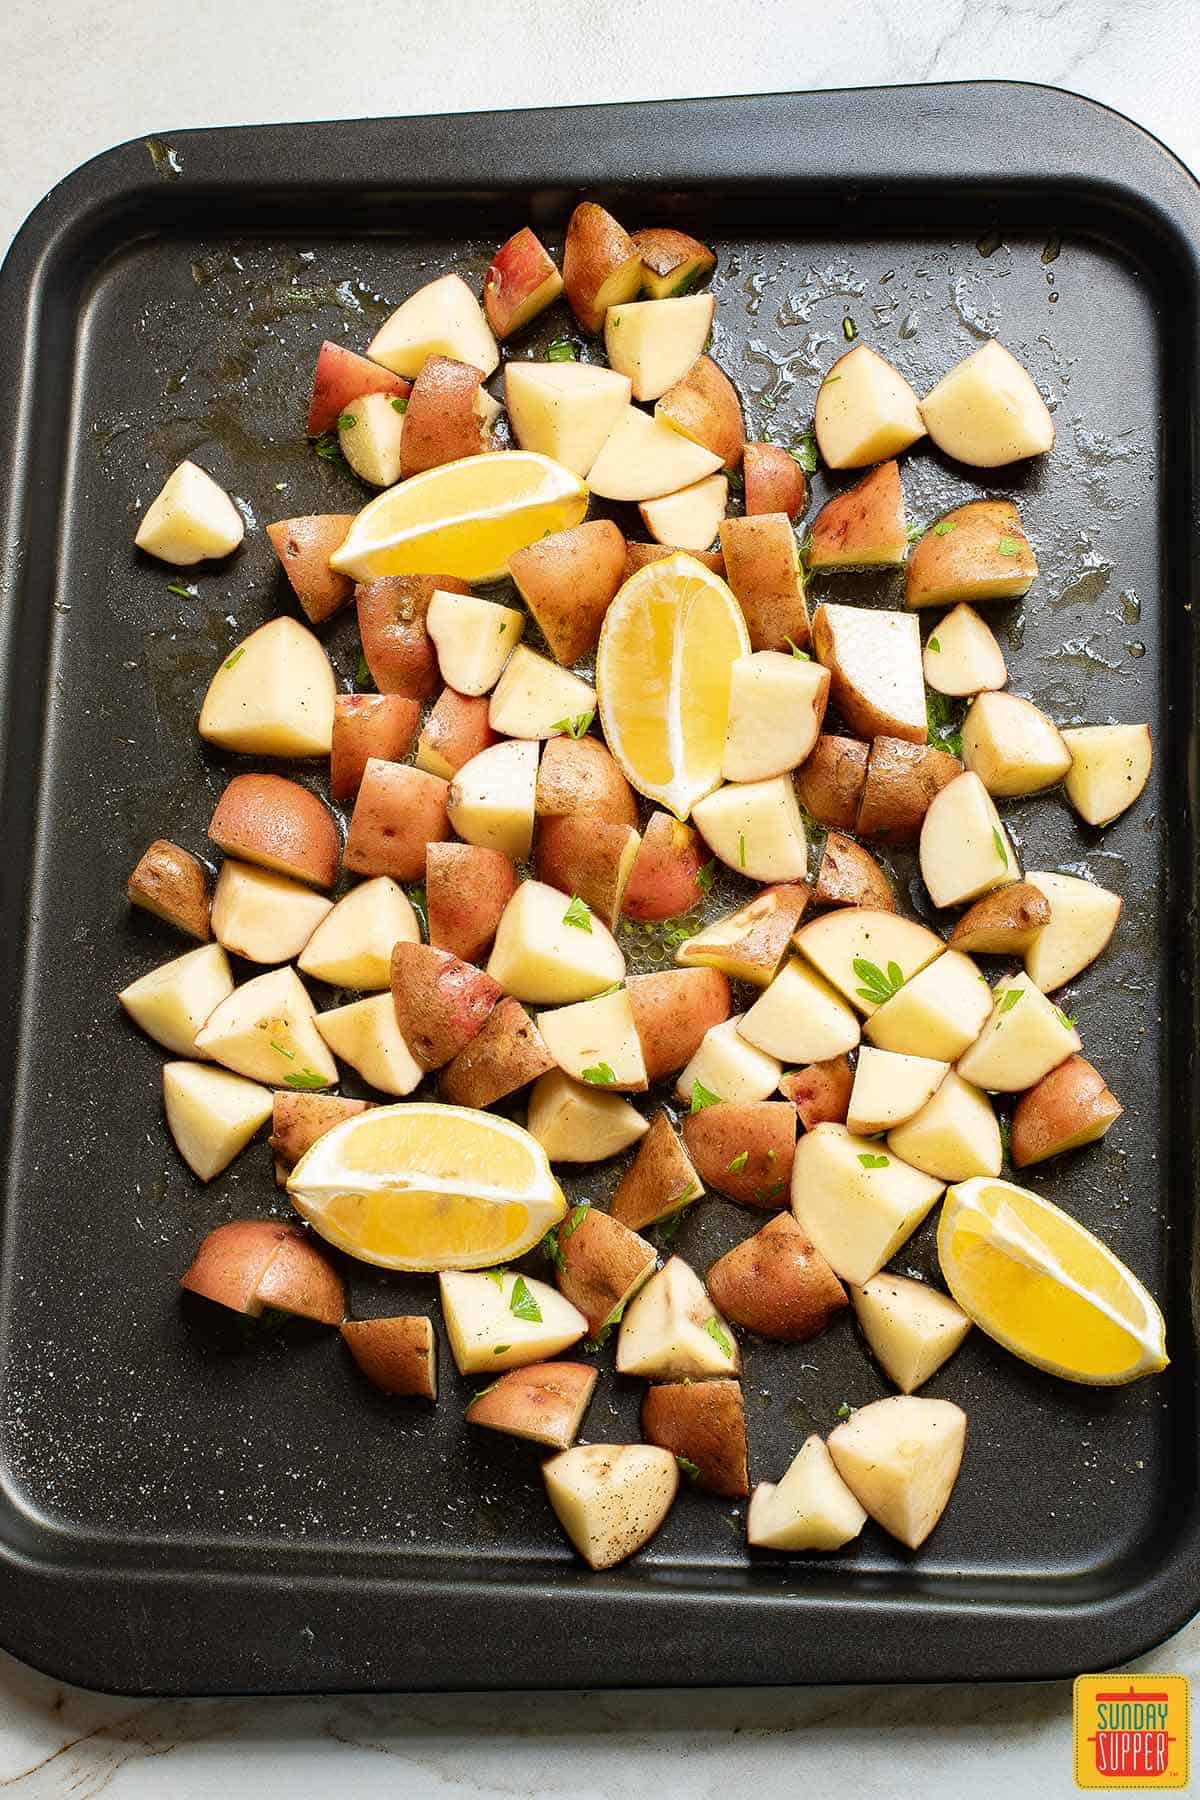 lemons and potatoes with seasonings on a pan before cooking